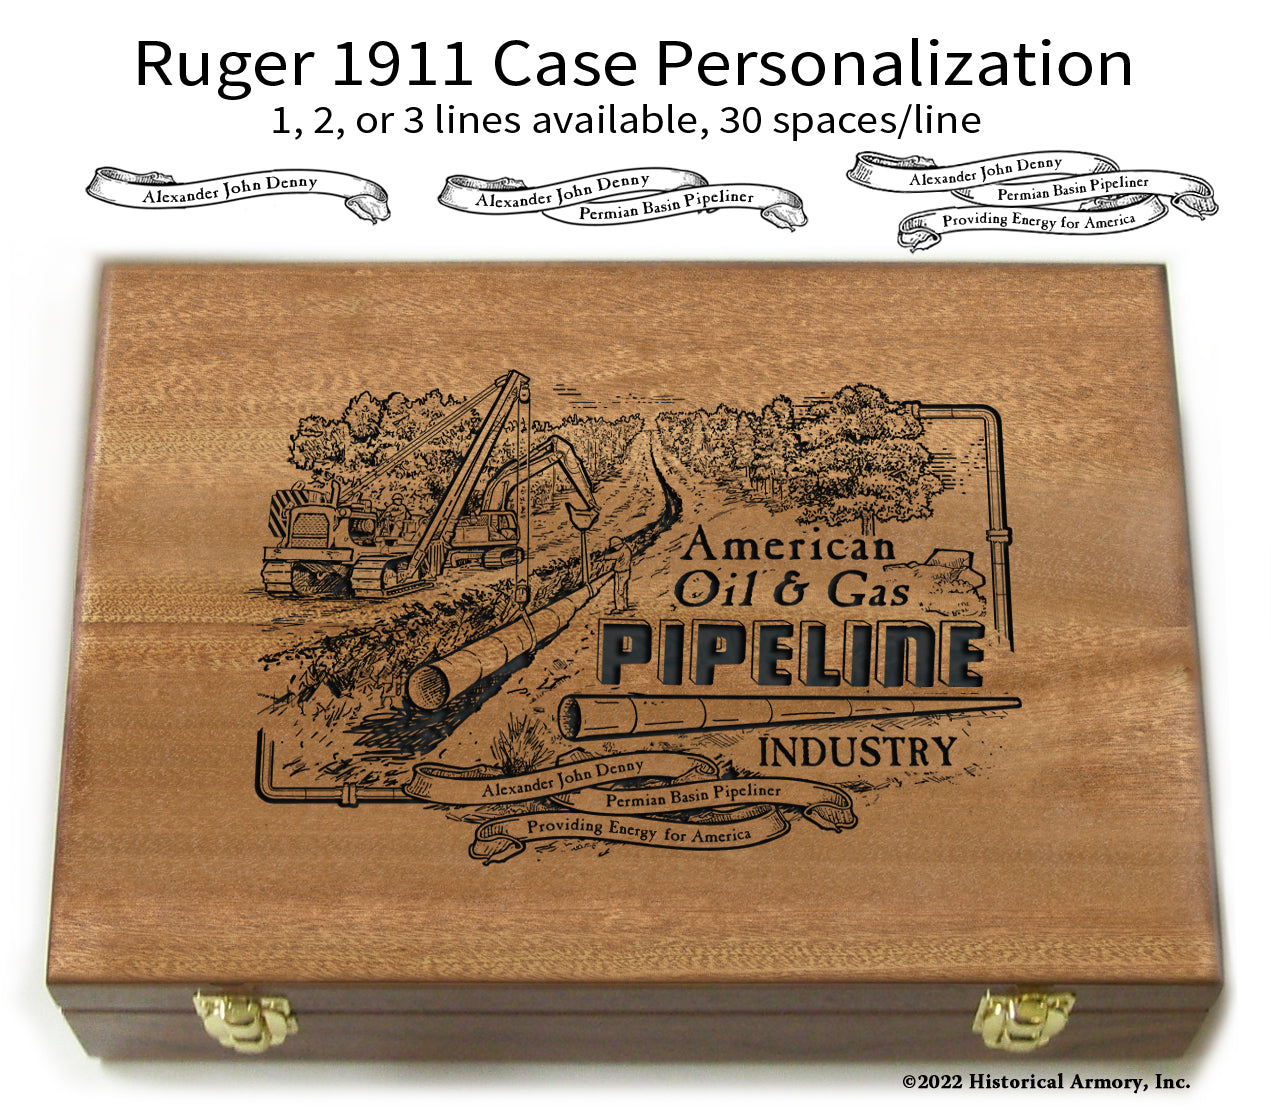 American Oil & Gas Engraved Ruger .45 Auto 1911 Personalized Presentation Case